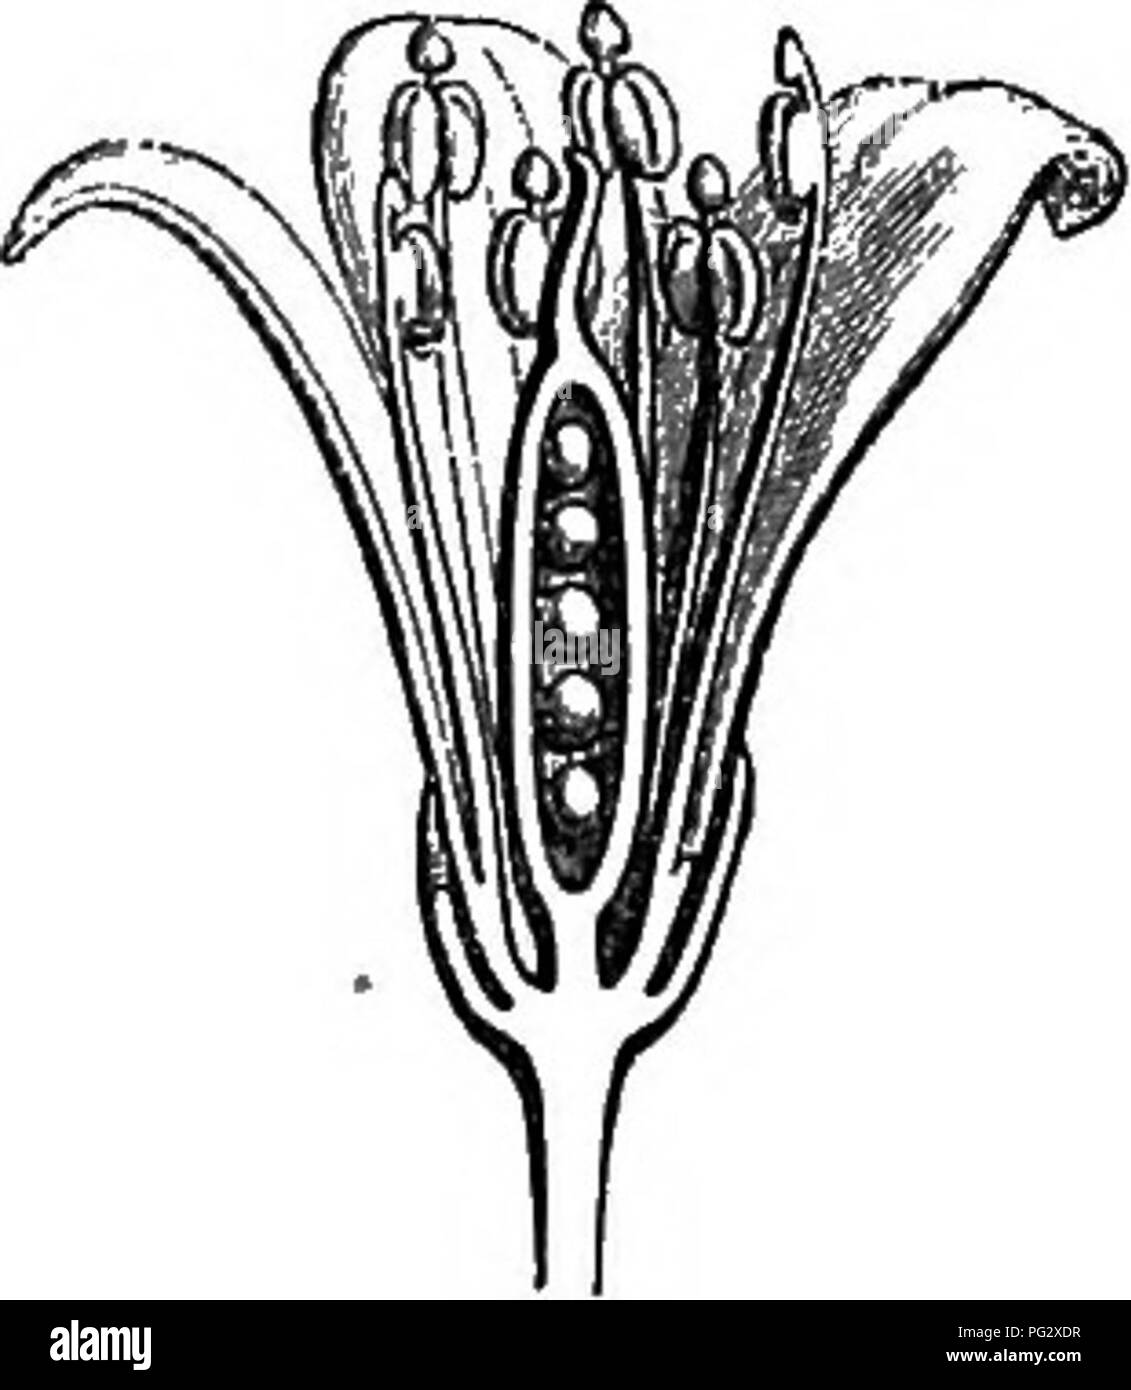 . The natural history of plants. Botany. ¥m. 16. Flower. Fig. 18. Diagram. Fm. 17. Longitudinal section of flower. Adenamtherd dehisces longitudinally,^ and is surmounted by a prolongation of the connective, forming a little caducous glandular ball. The gynseceum, inserted in the very bottom of the receptacle, consists of a single carpel superposed to one of the sepals. Its ovary, subsessile free and one-celled, tapers above into a slender style, scarcely dilated at the stigmatiferous apex. Inside the cell of the ovary and opposite to one of the petals* is a longitudinal parietal placenta, who Stock Photo